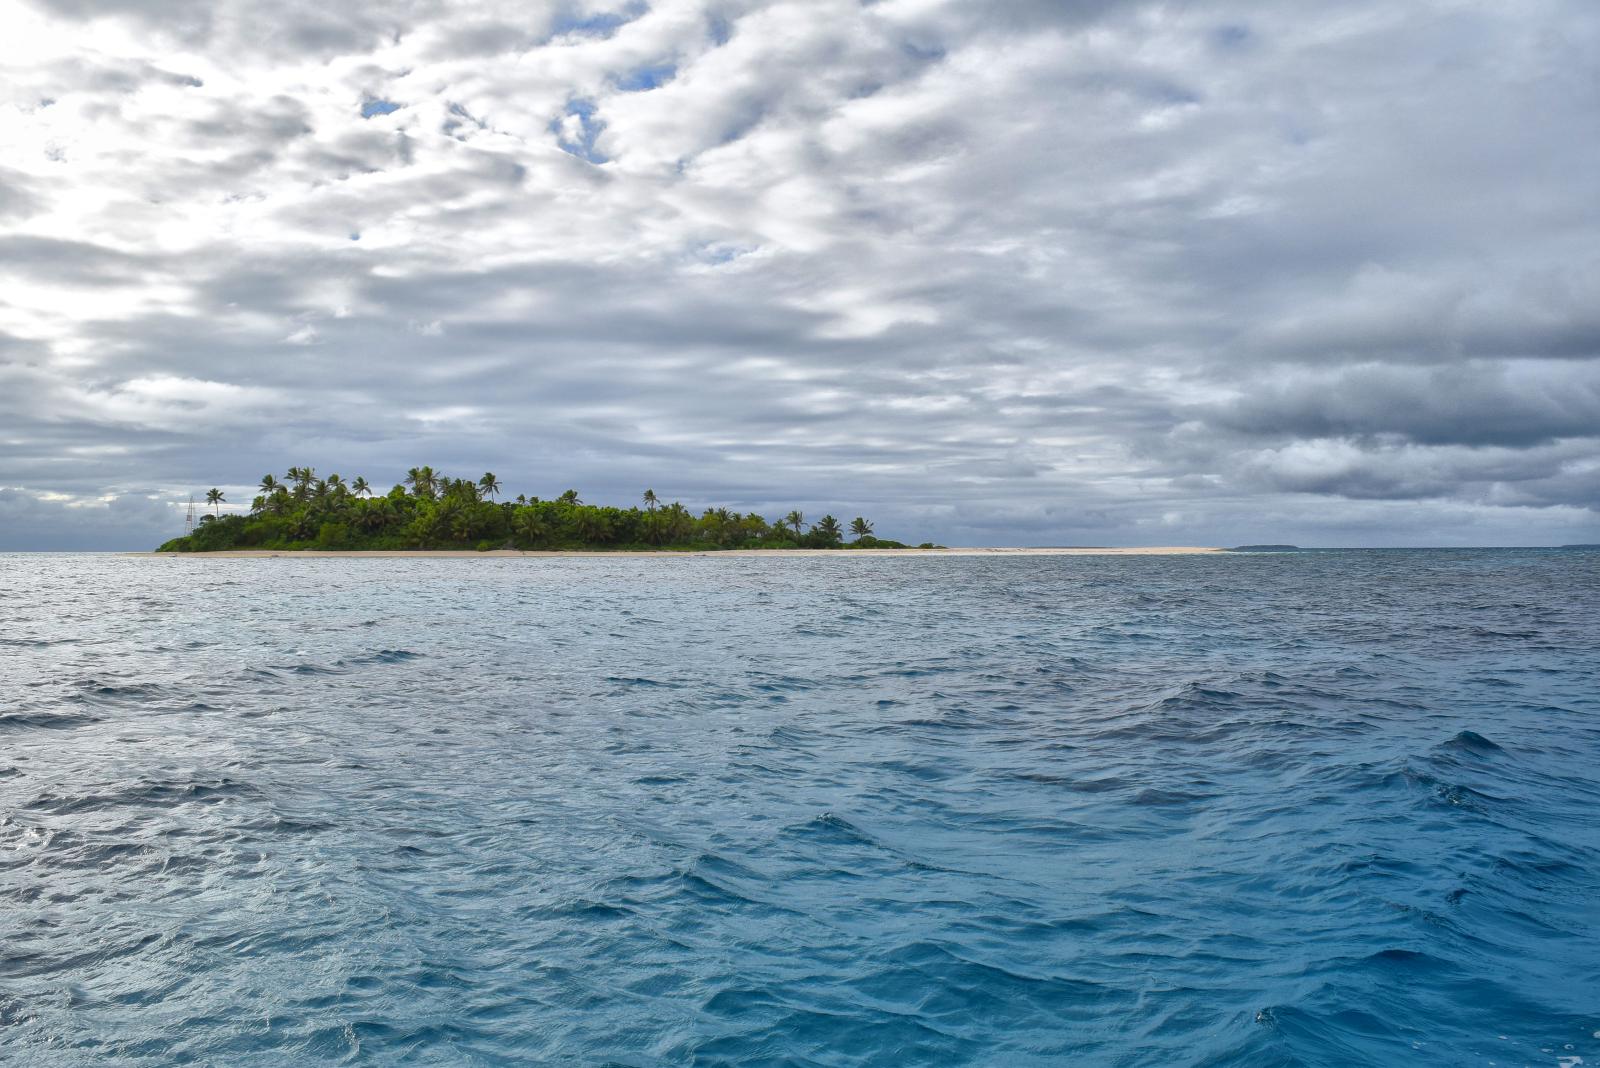 10 Things to Do in Tonga on a Rainy Day